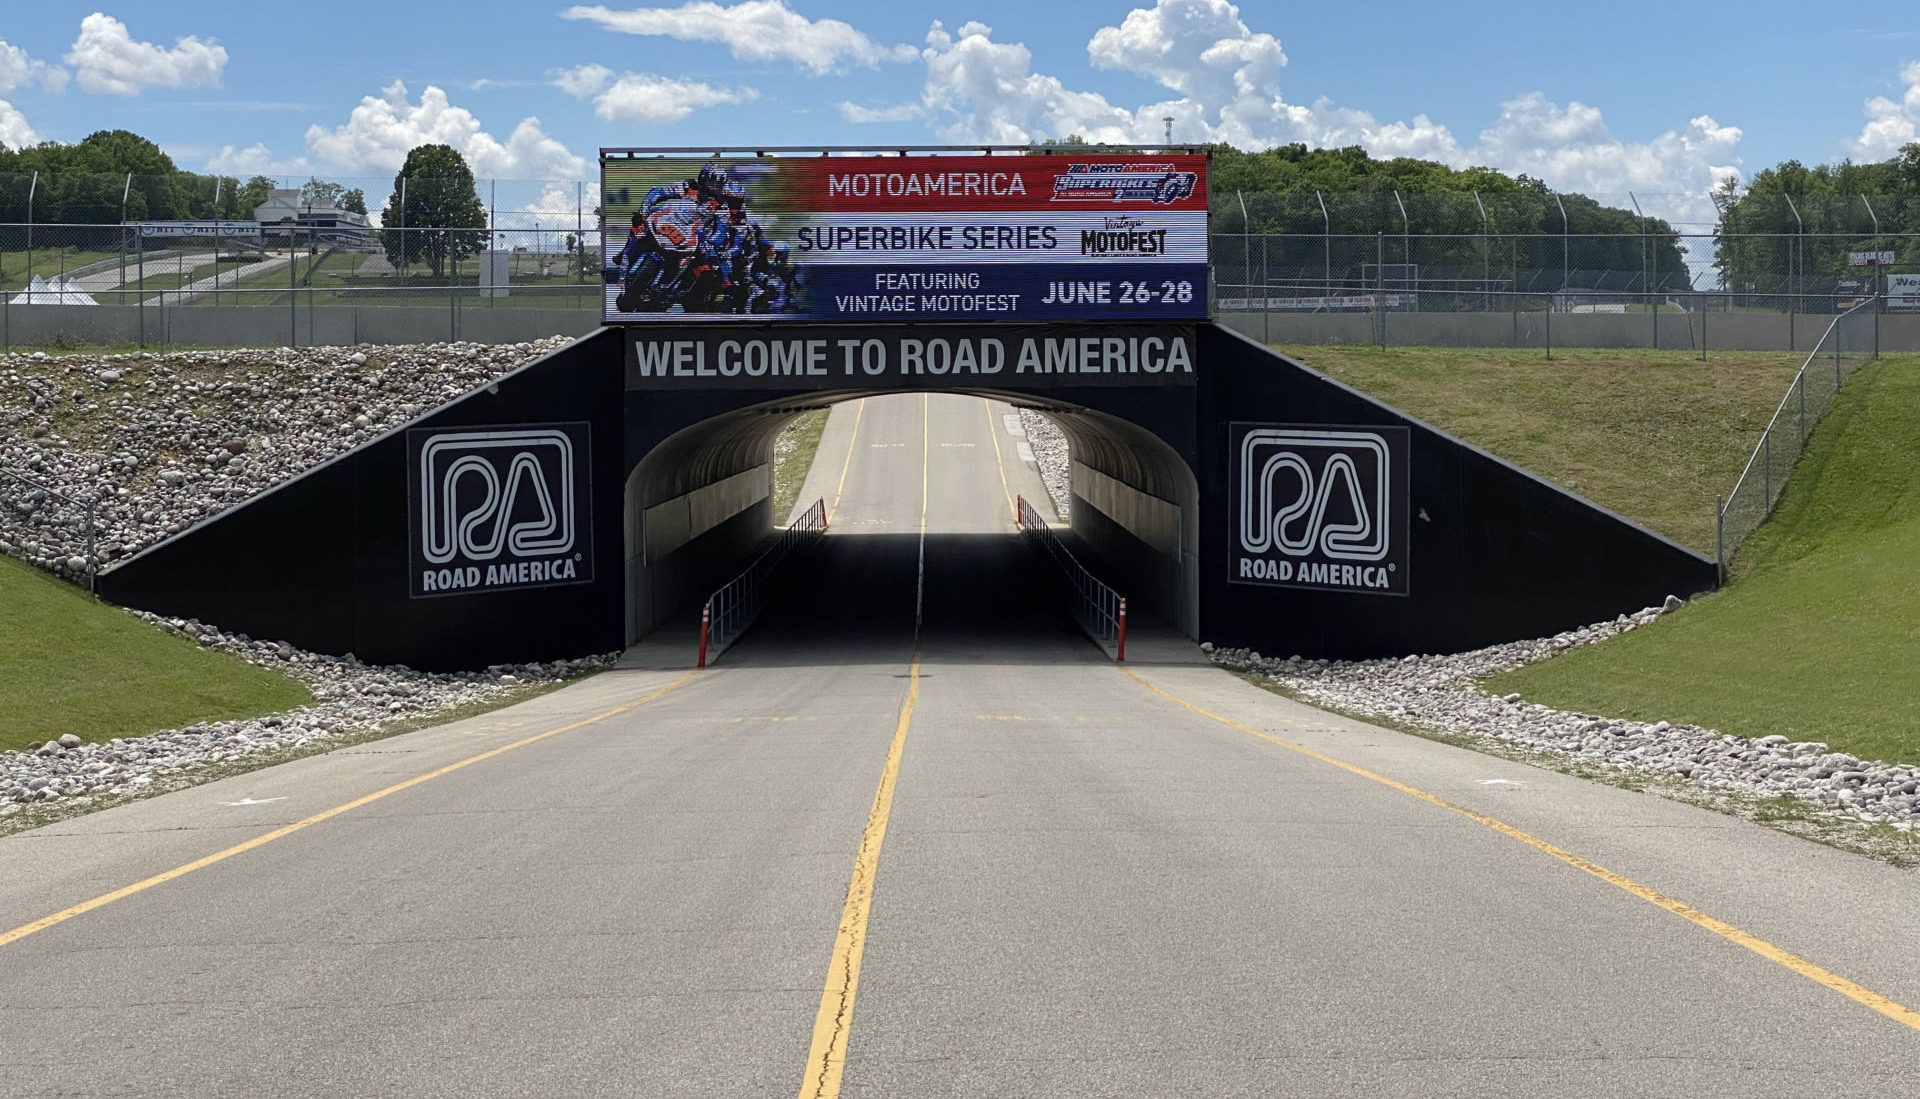 The tunnel leading into the paddock at Road America on Wednesday, June 24th. Photo by John Ewert.